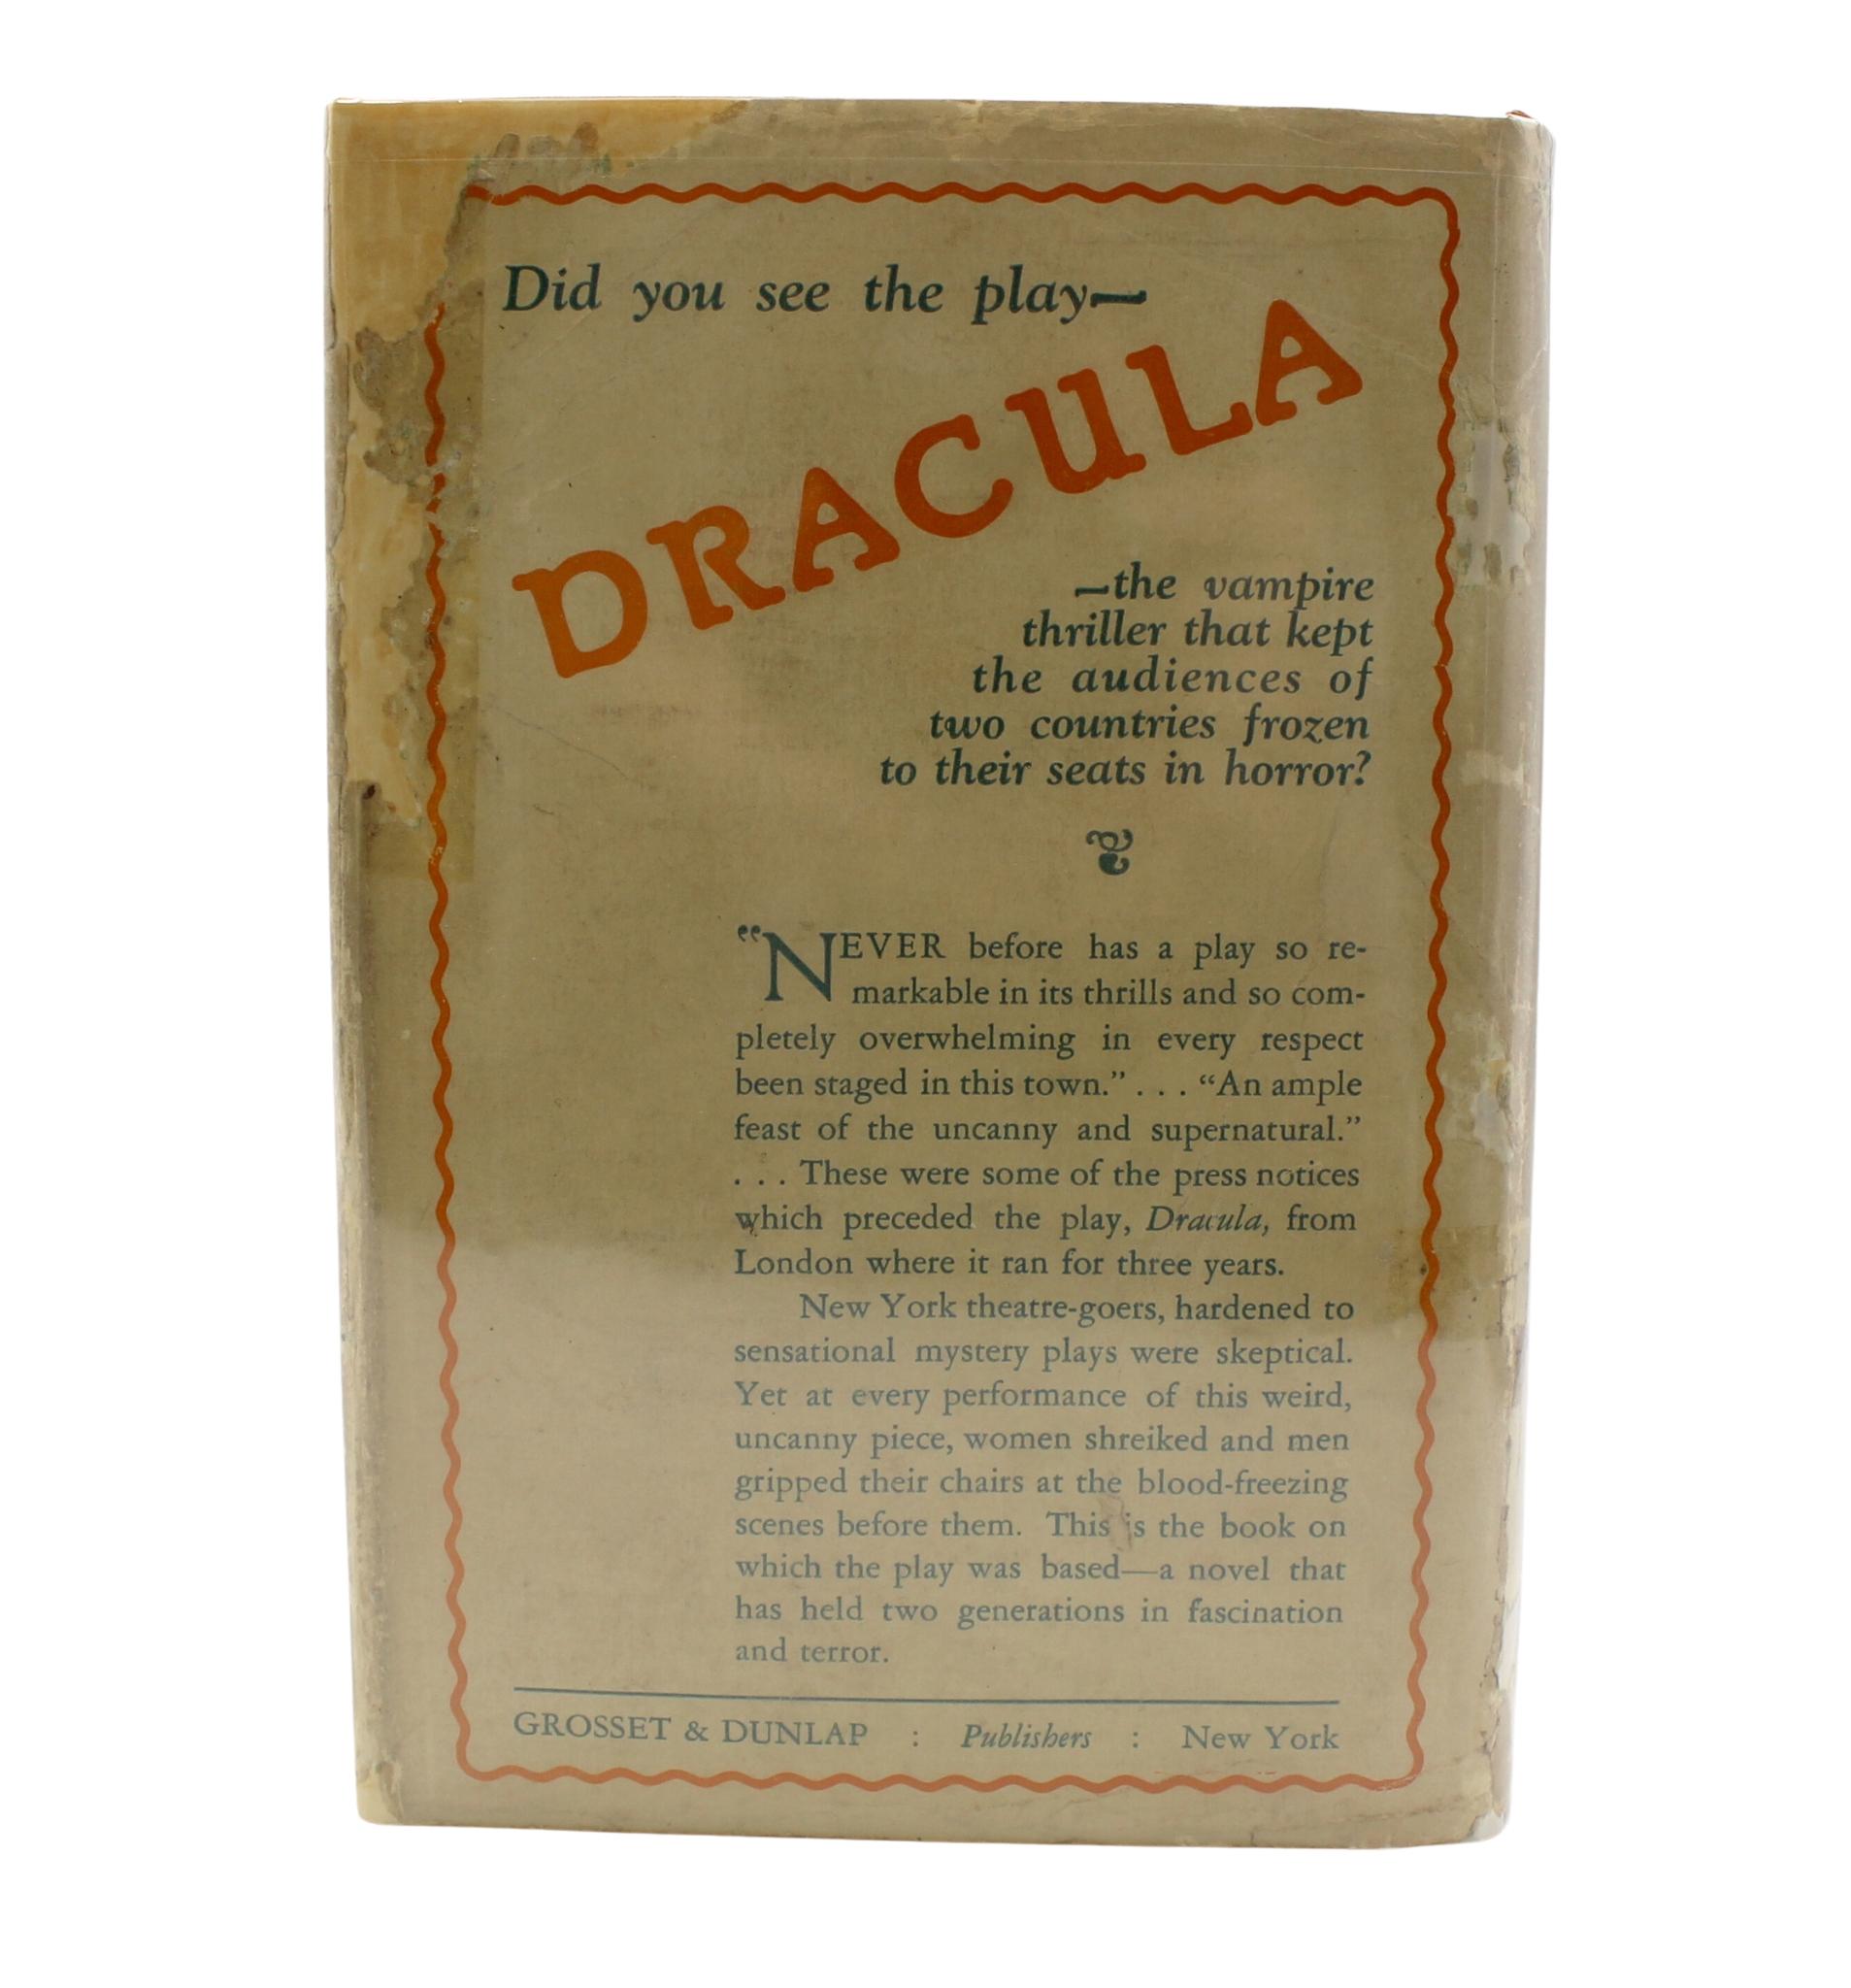 who wrote the first dracula book